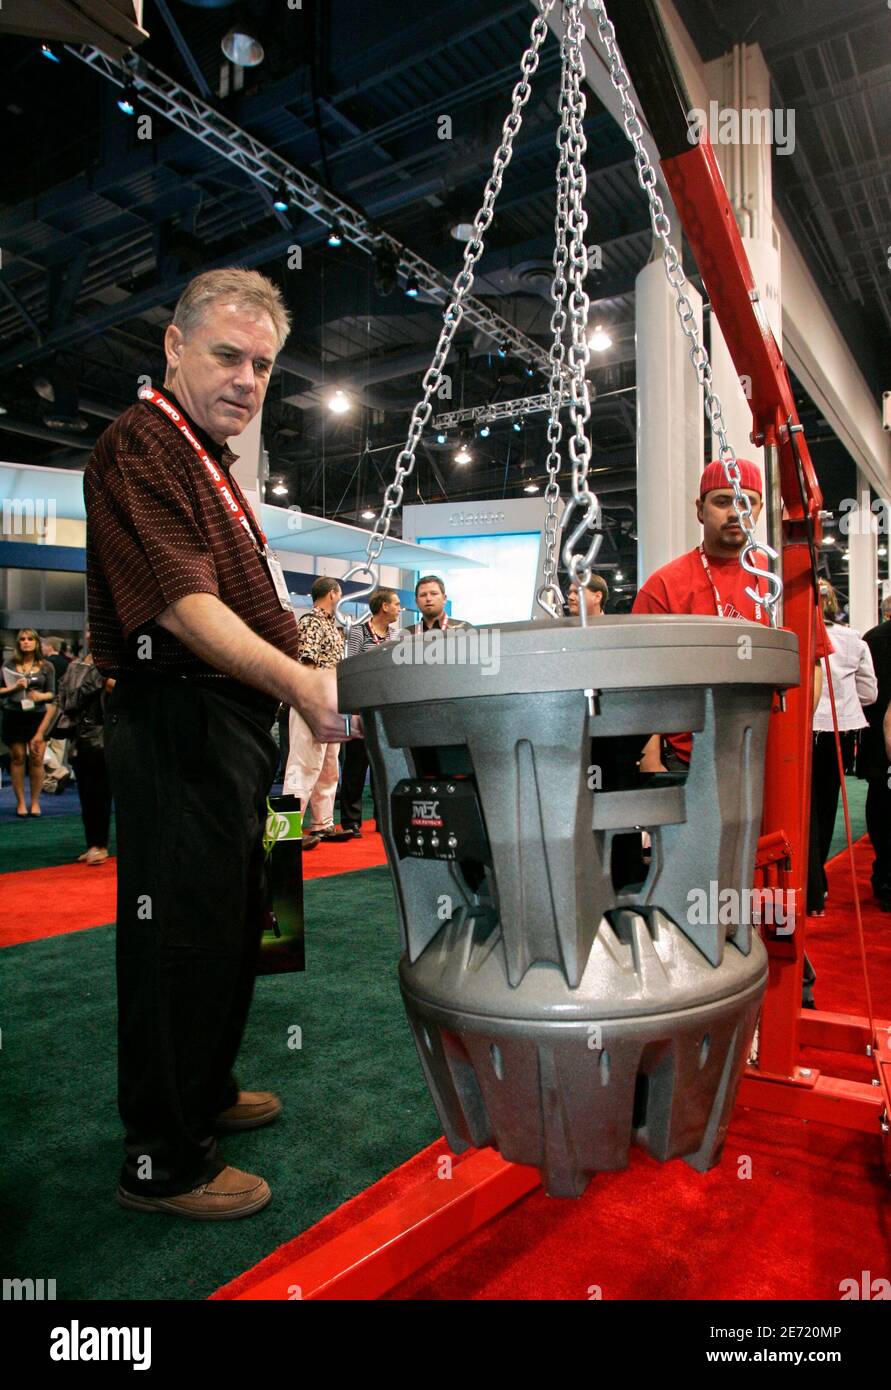 Ray Smith looks at the 'Jackhammer' subwoofer at the MTX Audio booth during the 2007 International International Consumer Electronics Show (CES) in Las Vegas, Nevada January 9, 2007. The 22-inch subwoofer wieghs 369 lbs. and can handle 12,000 watts of power, a representative said. The subwoofer is currentely available for $7,500, he said.  REUTERS/Steve Marcus (UNITED STATES) Stock Photo